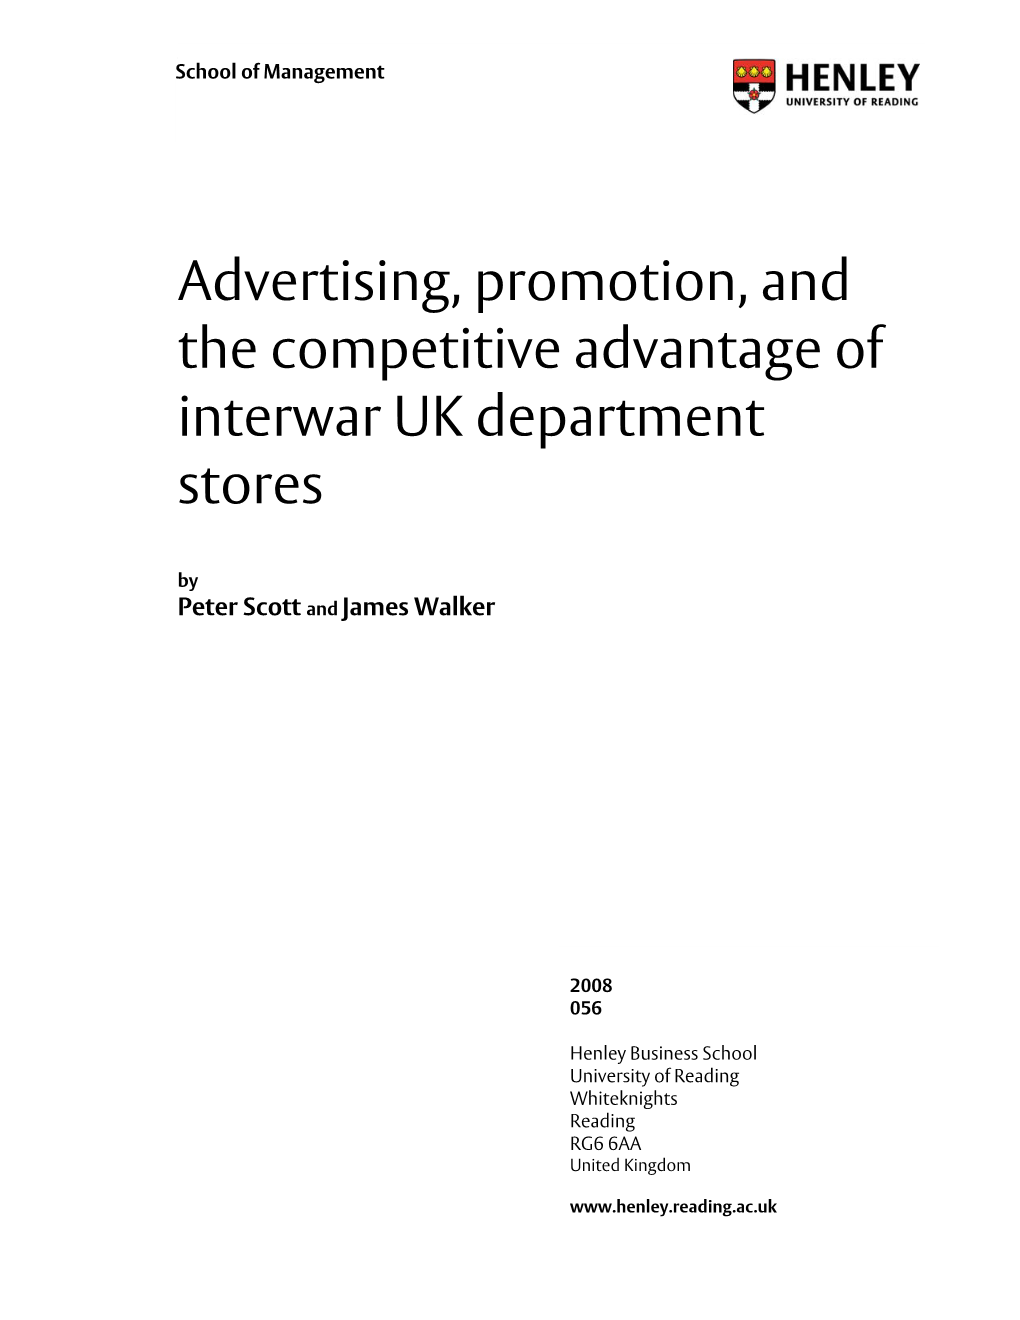 Advertising, Promotion, and the Competitive Advantage of Interwar UK Department Stores